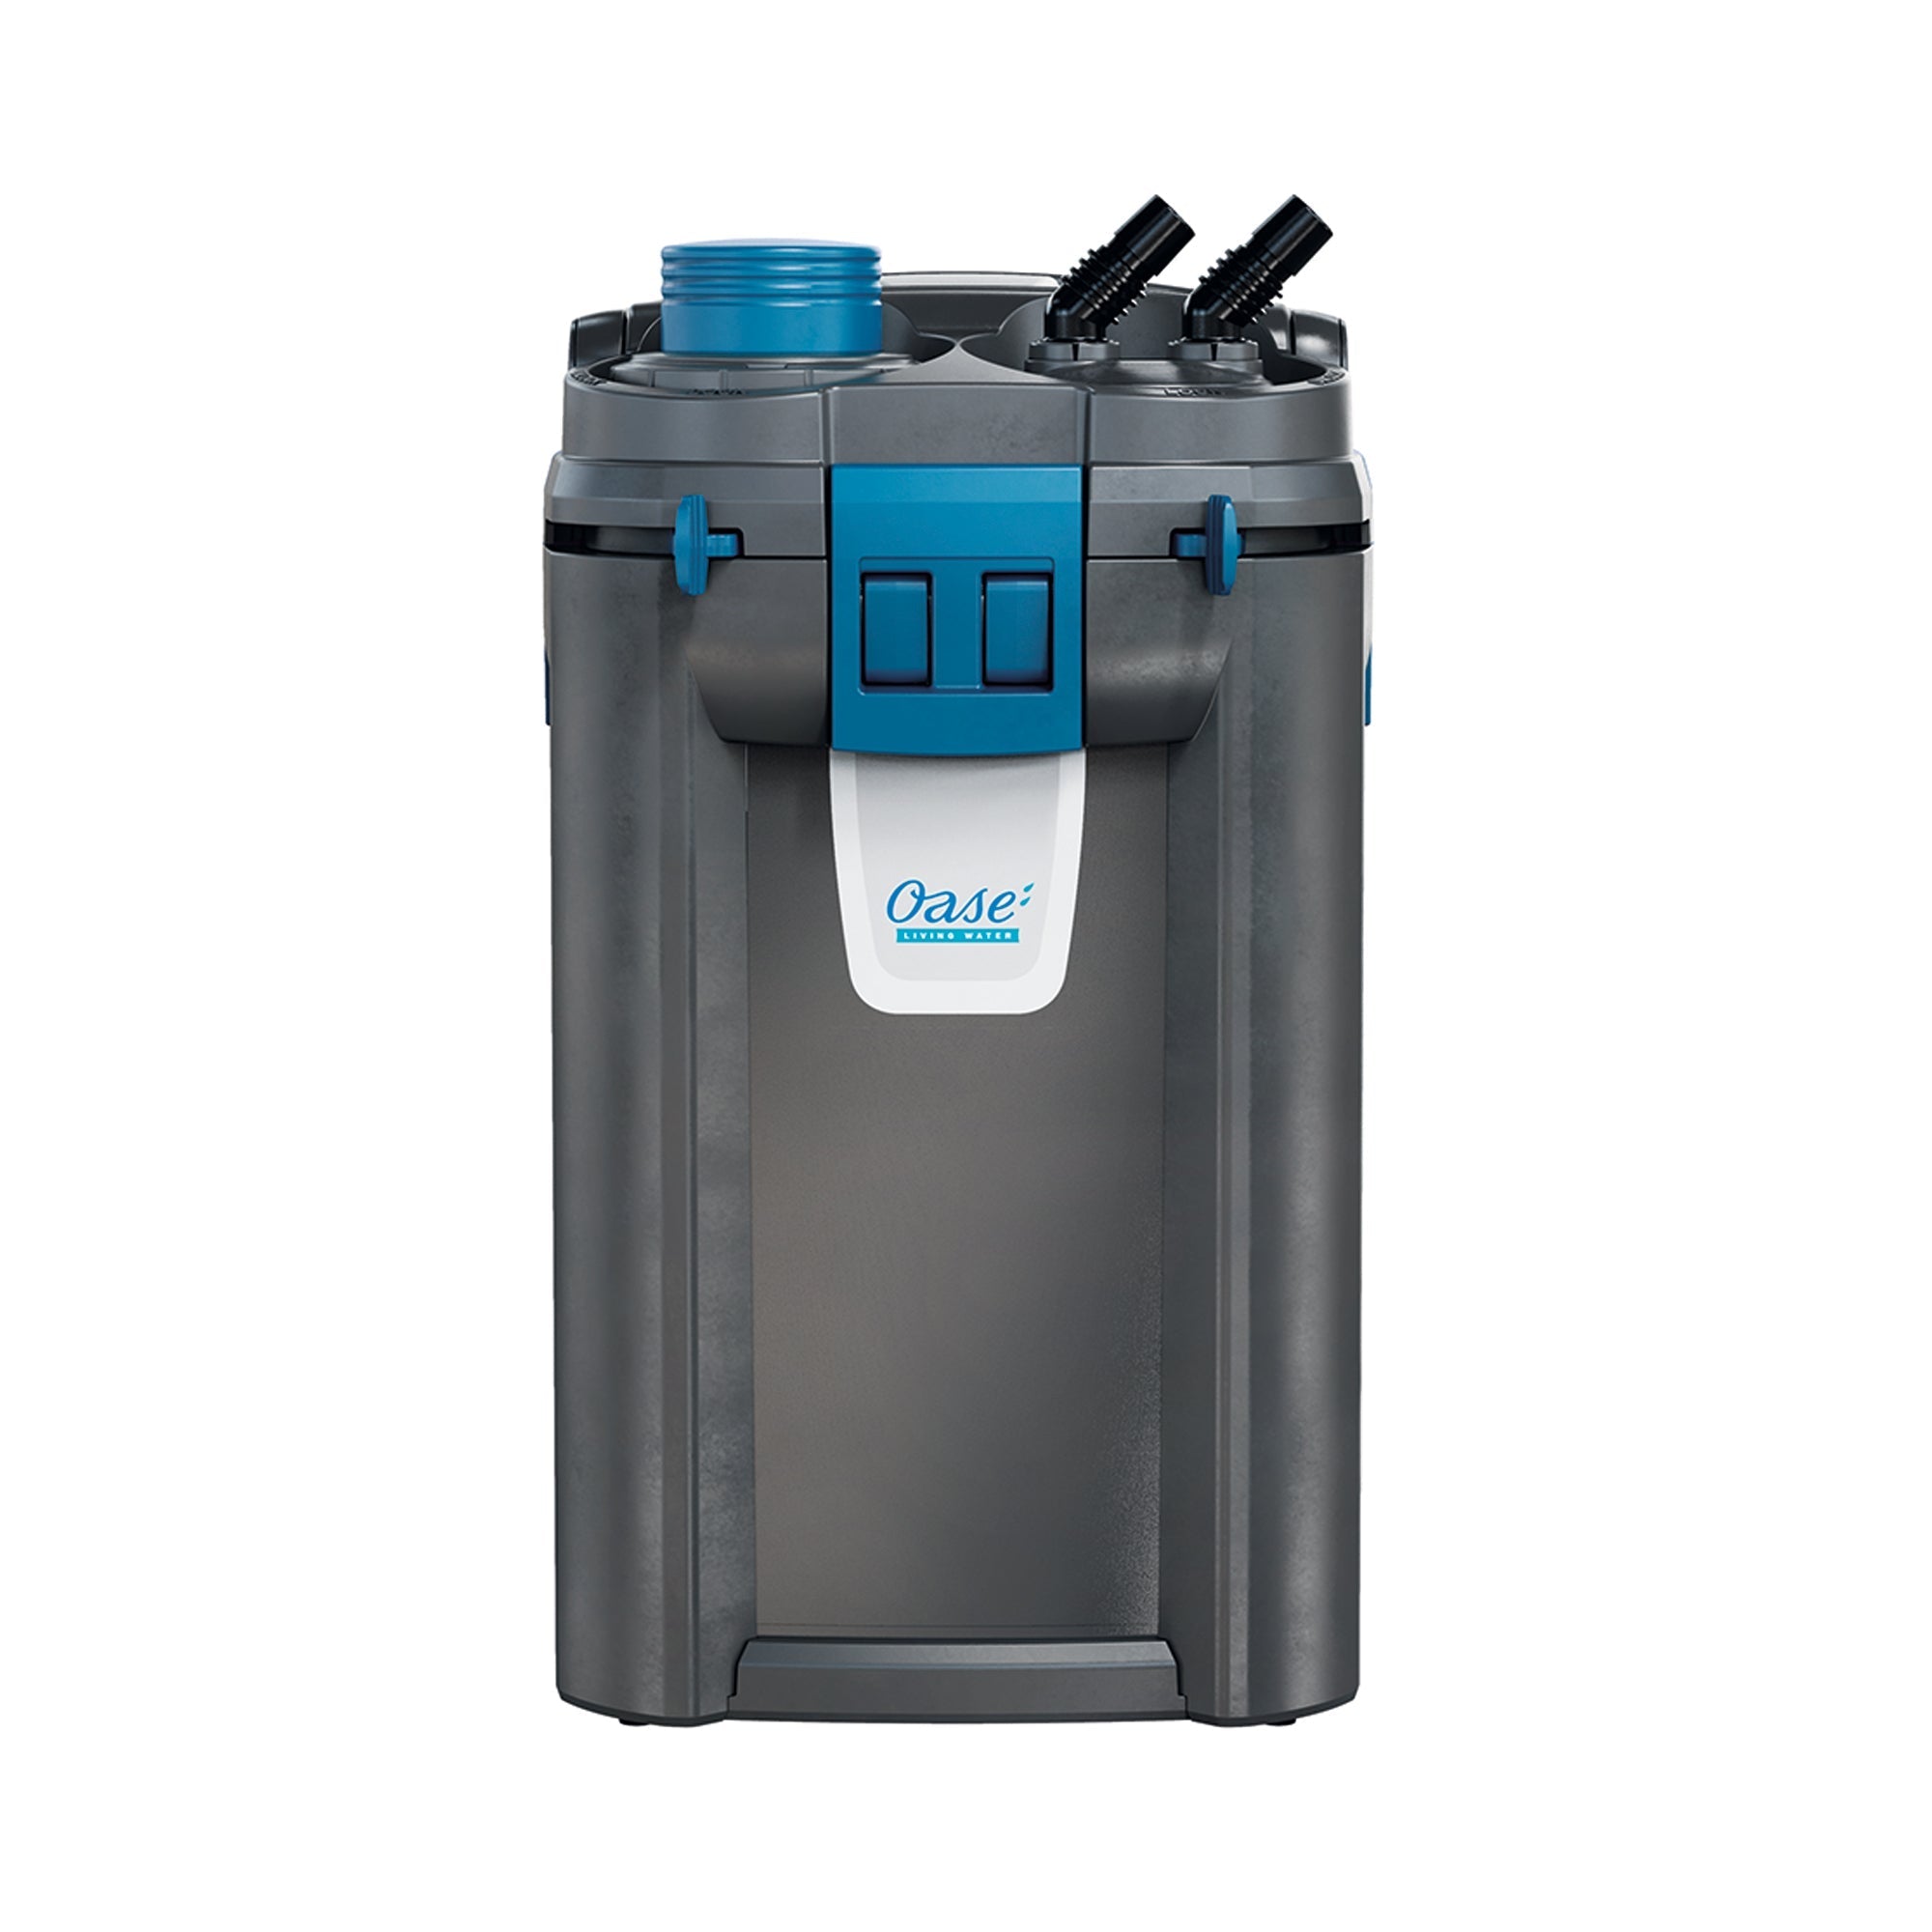 OASE BioMaster 350 Canister Filter